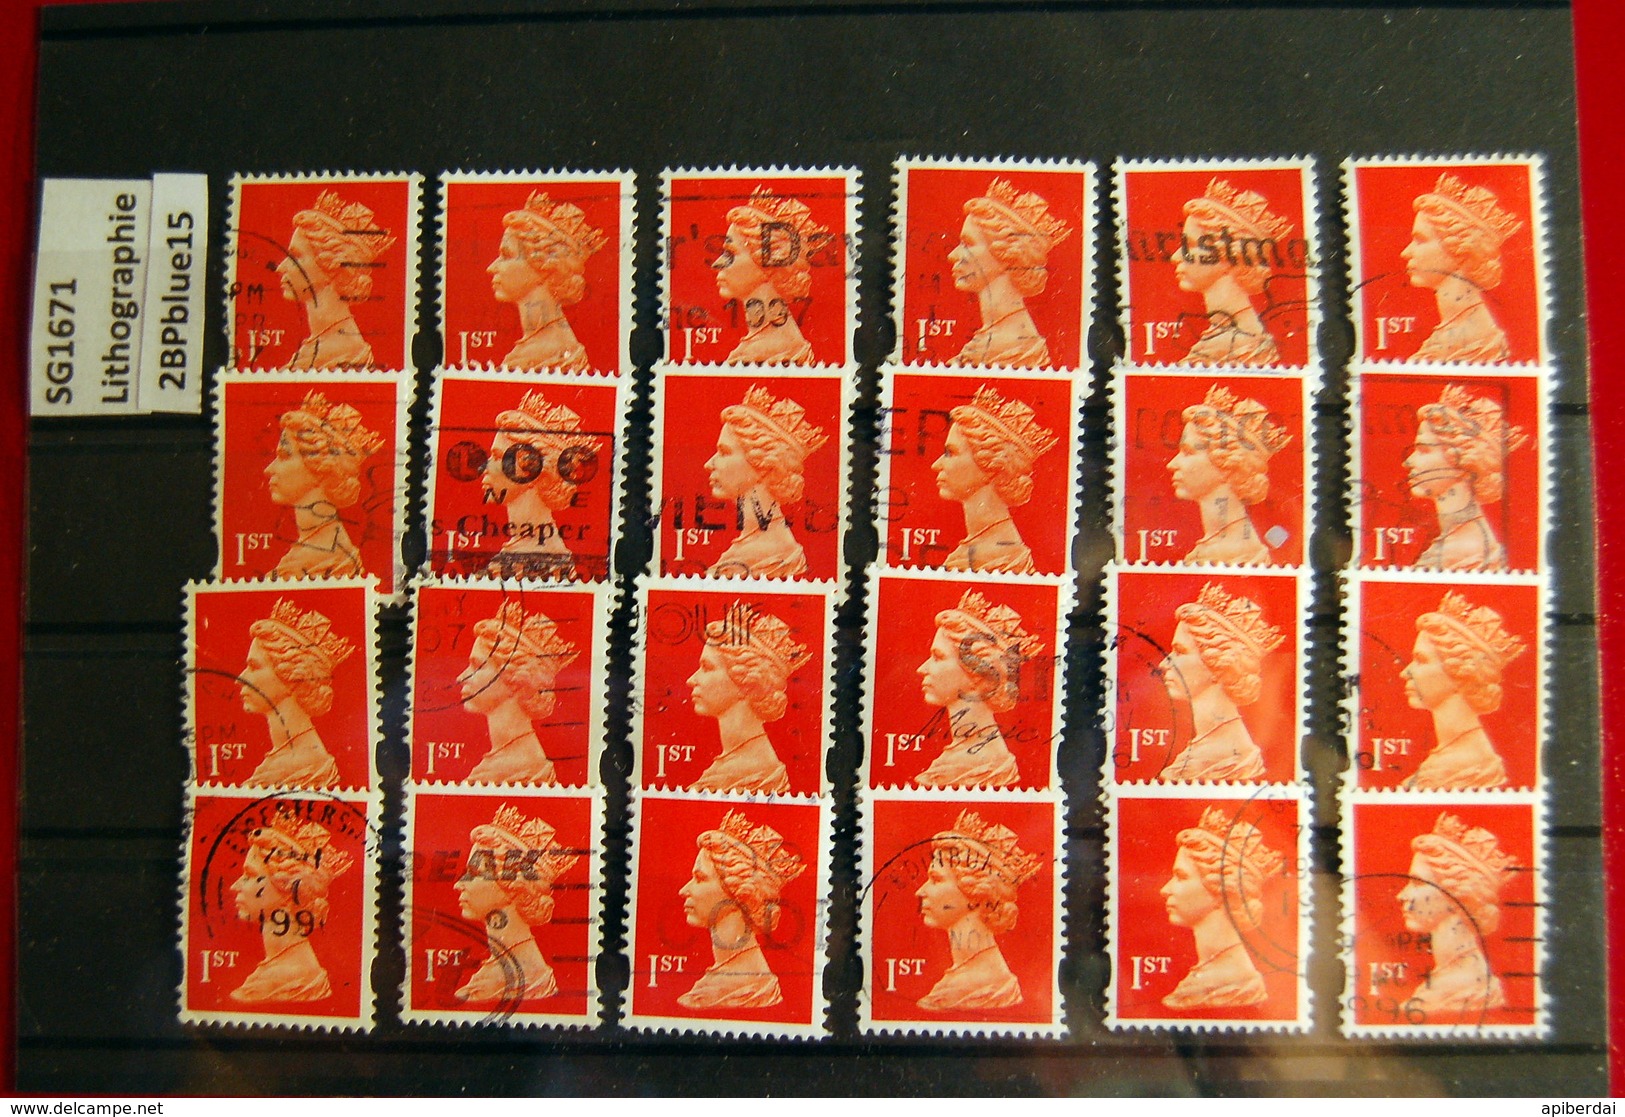 Great Britain - Machin NVI 1ST SG1671 ELLIPTICAL LITHO. 2BPblue15  - 24 Stamps Used - Machins